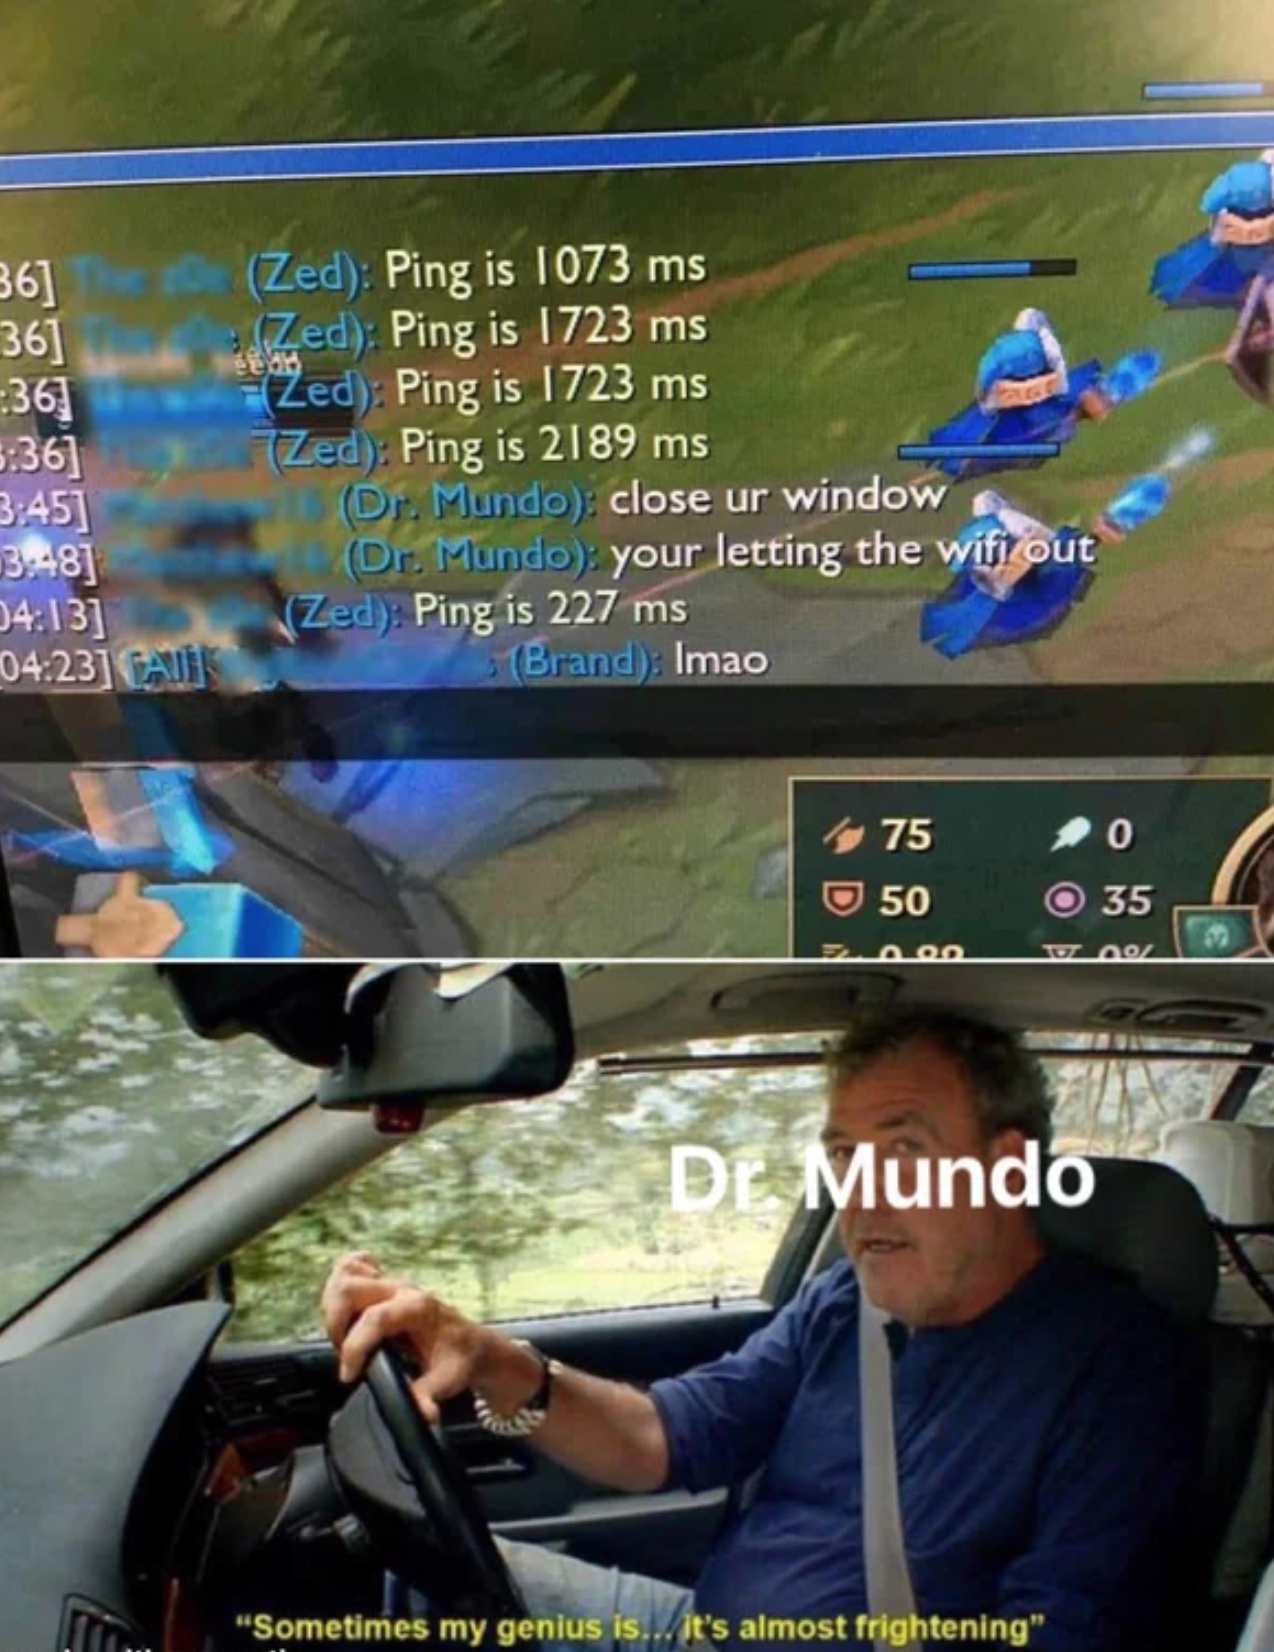 funny gaming memes -  Zed Ping is 1723 ms Zed Ping is 1723 ms Zed Ping is 2189 ms Dr. Mundo close ur window Dr Mundo your letting the wififout Zed Ping is 227 ms Brand. Imao 75 50 0 35 Aq Dr Mundo